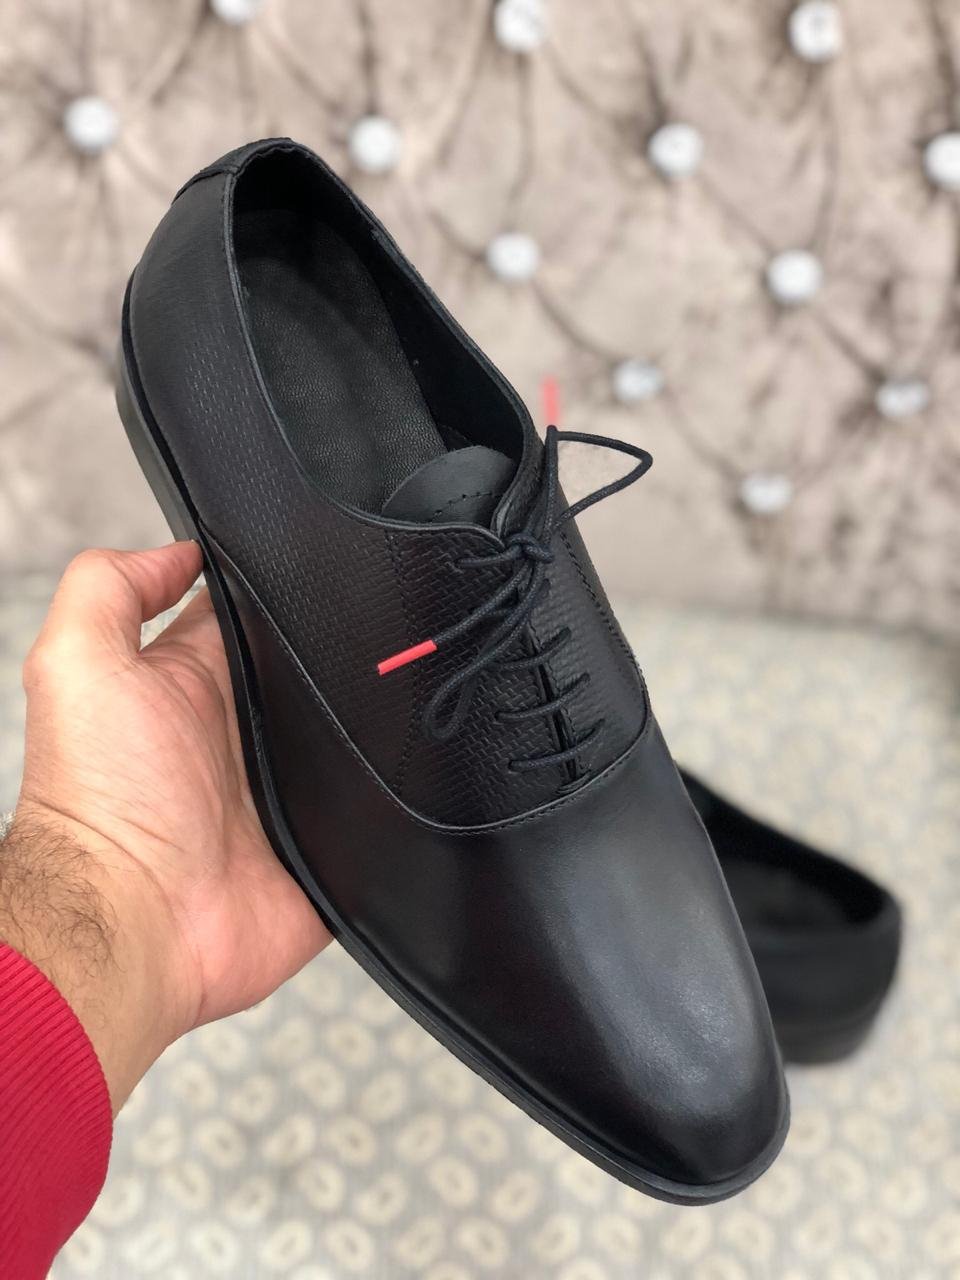 funky shoes on Instagram: Now new premium quality tranding formal